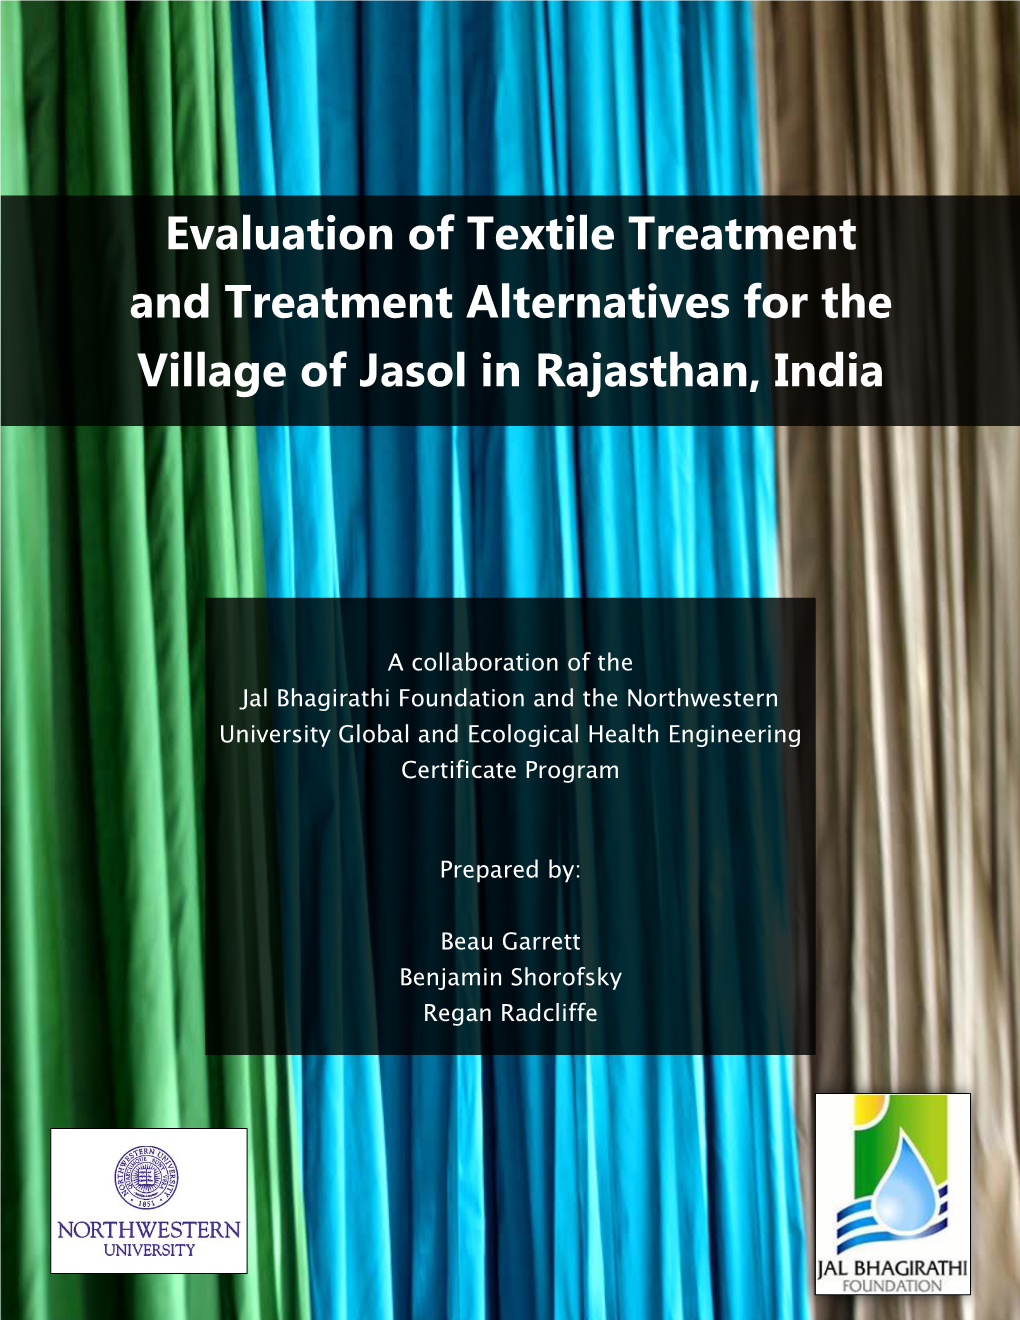 Evaluation of Textile Treatment and Treatment Alternatives for the Village of Jasol in Rajasthan, India